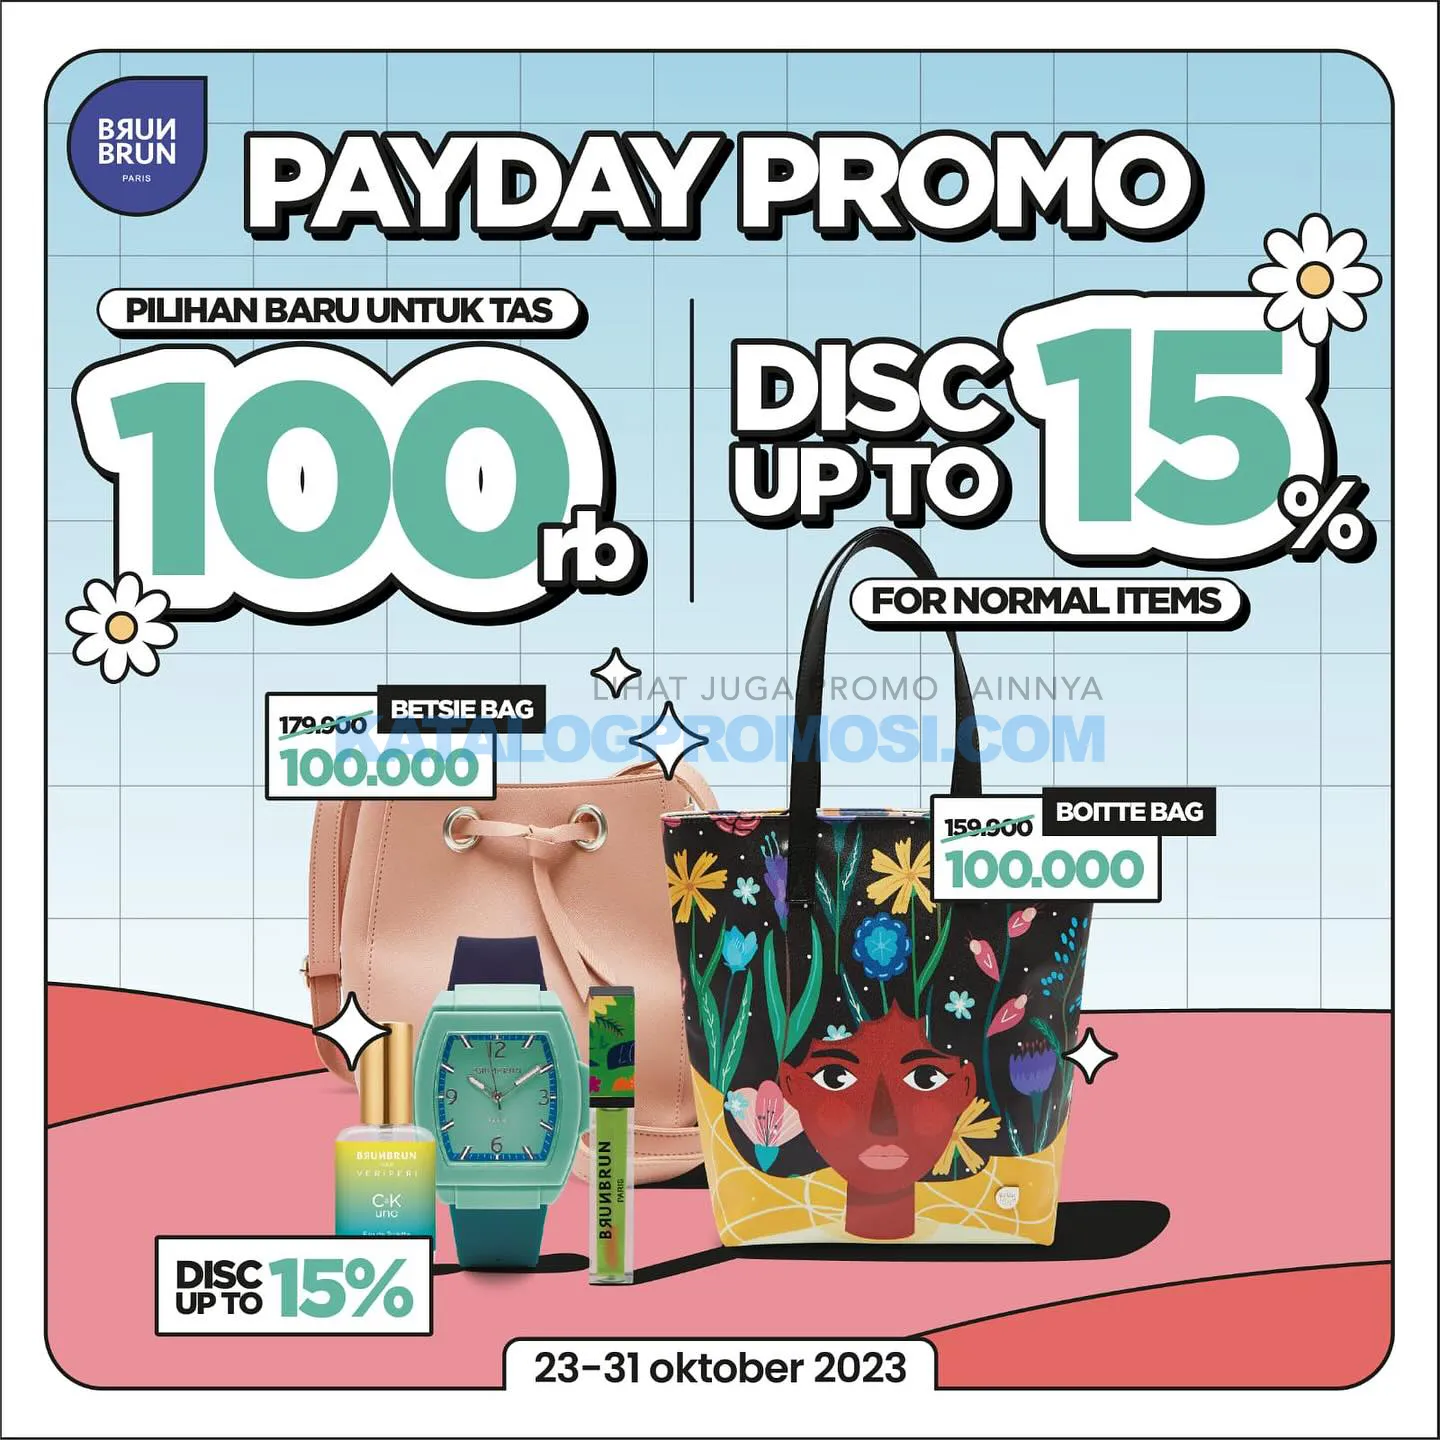 PROMO BRUNBRUN SPECIAL PAYDAY 